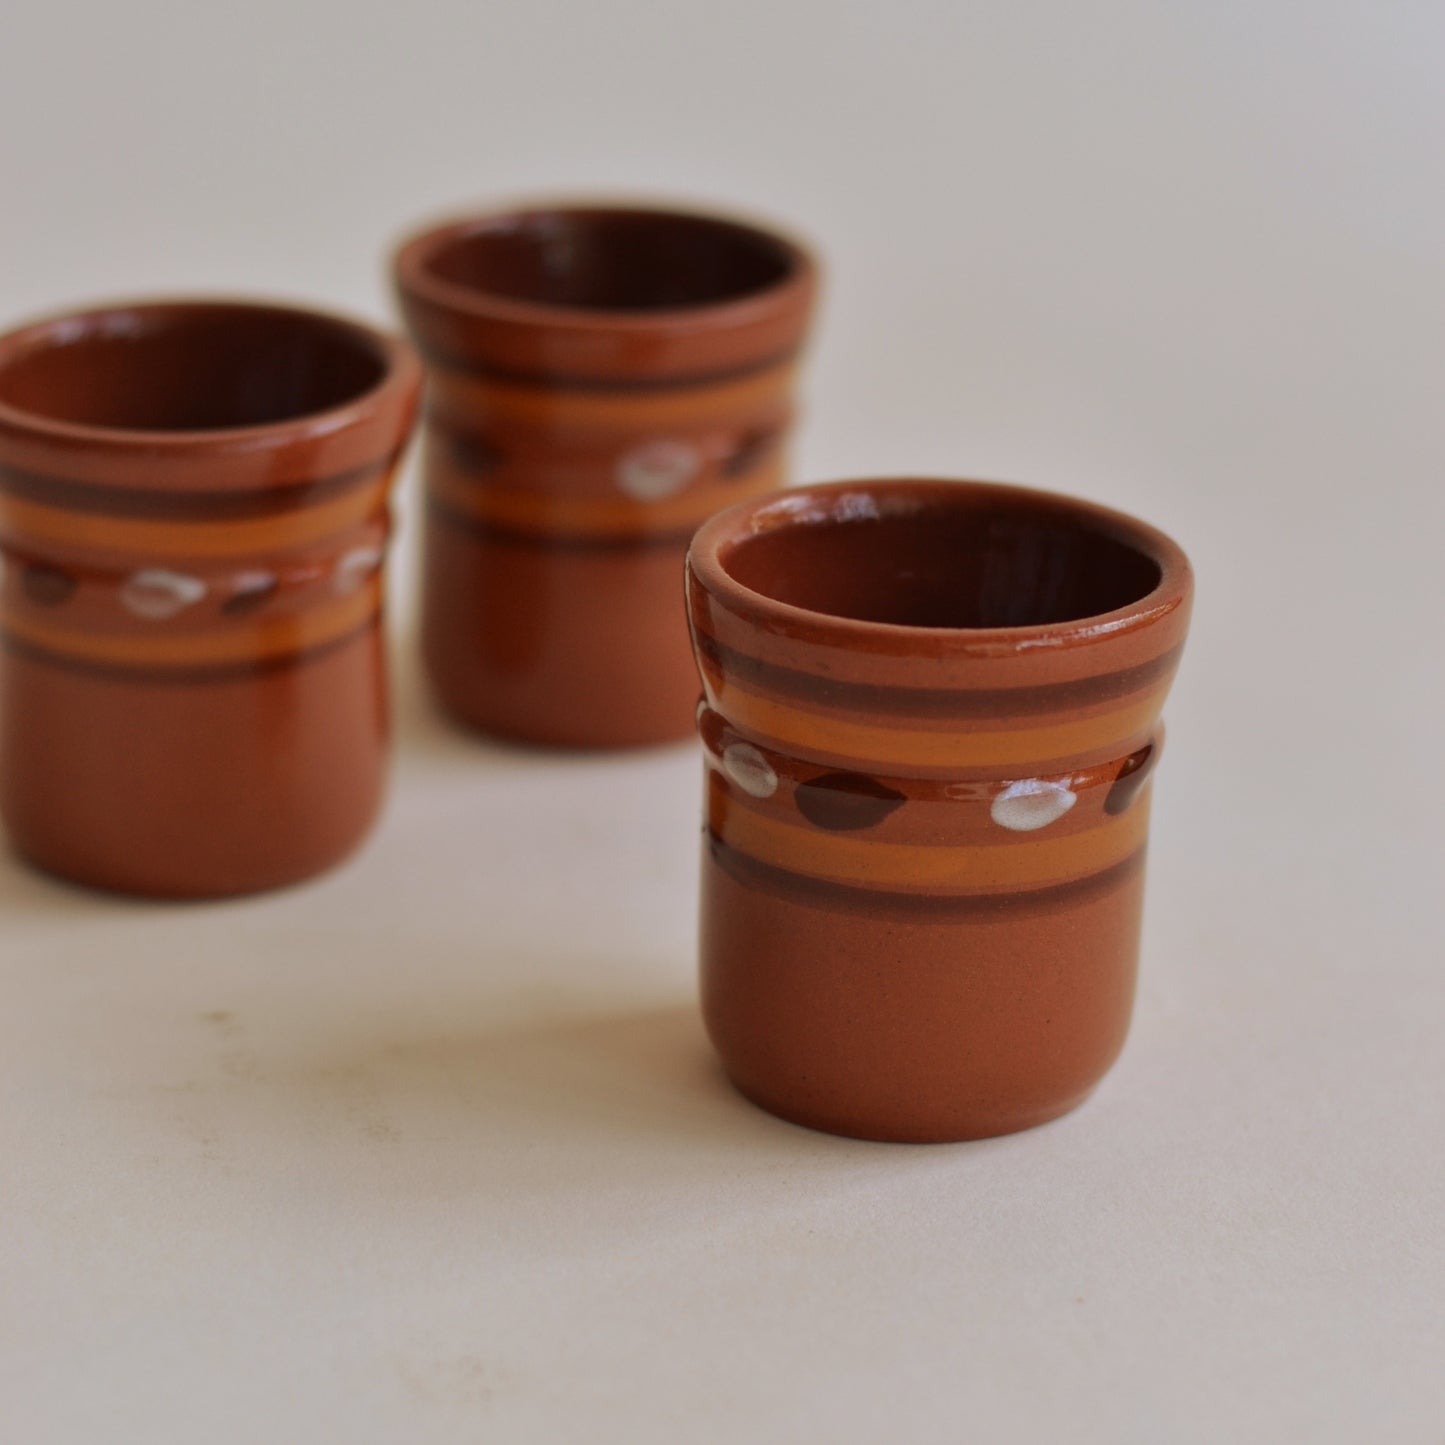 Pottery Match or Toothpick Holders